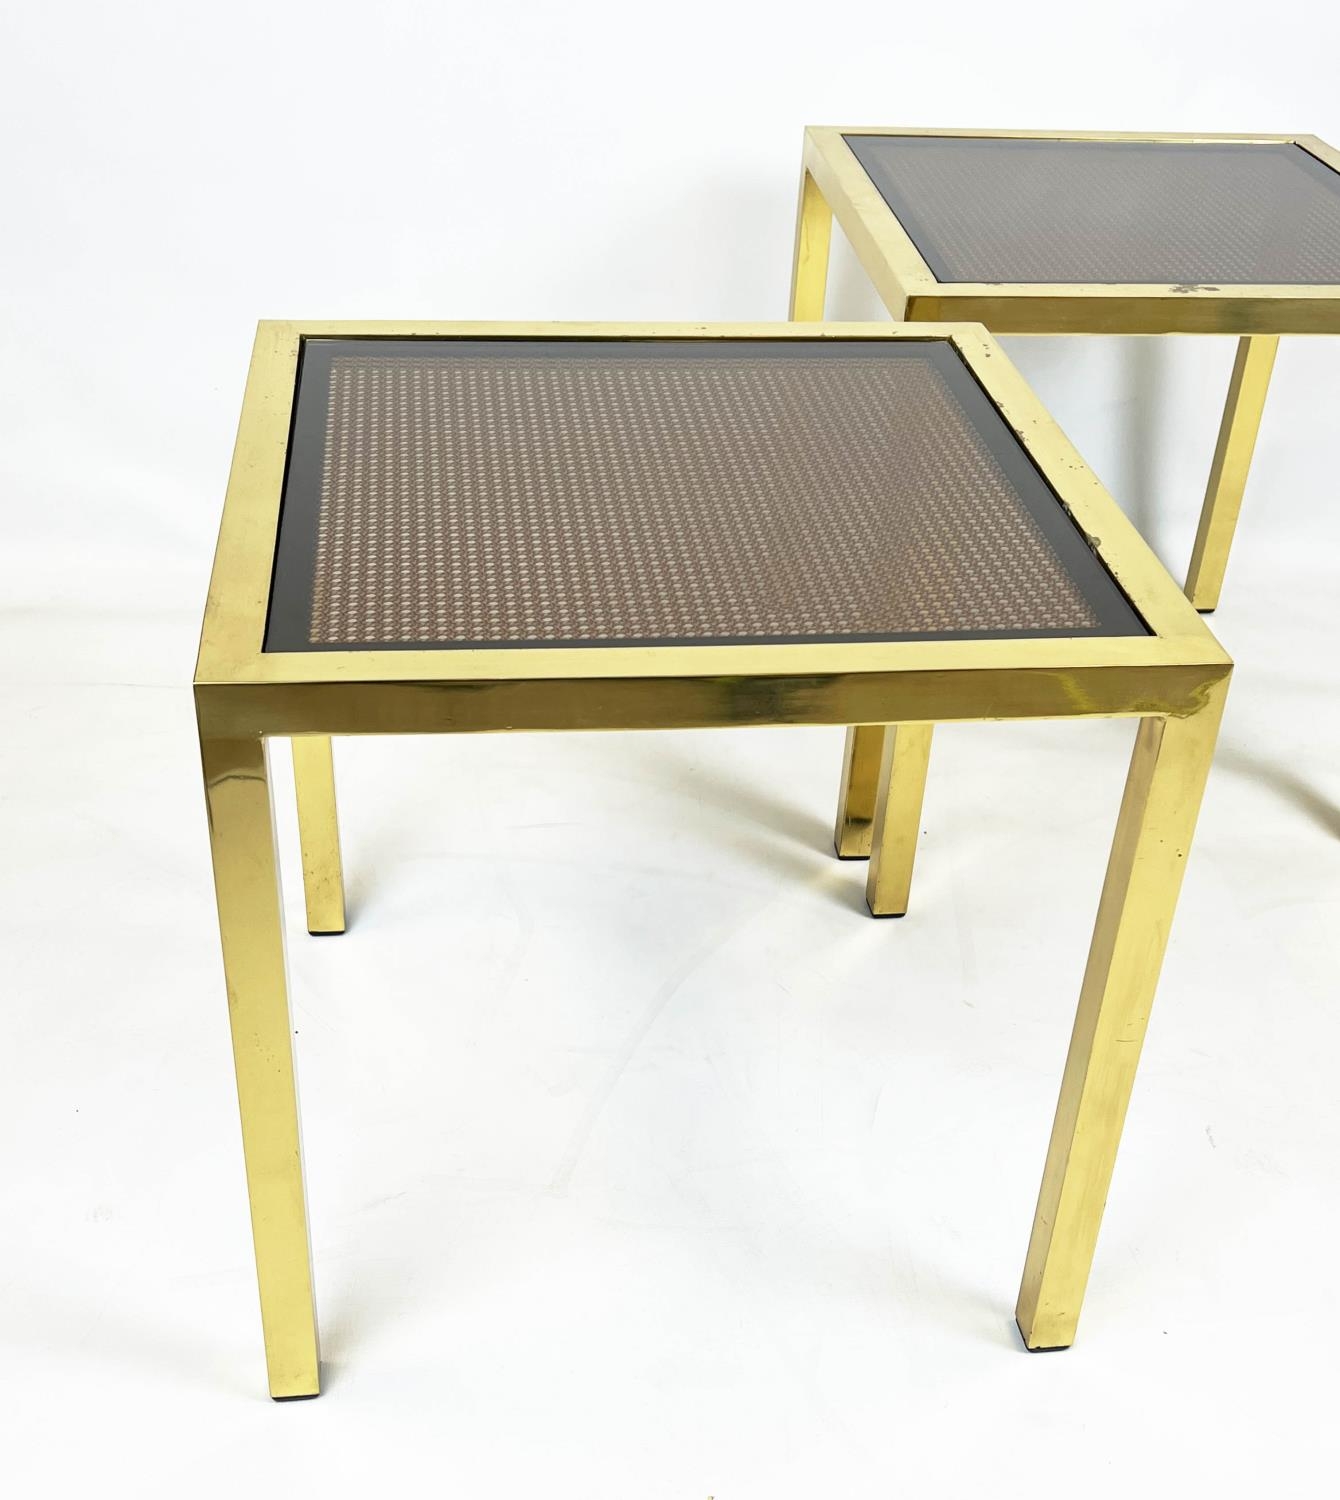 SIDE TABLES, a pair, 1960s French style, 53cm H x 53cm, to match previous lot. (2) - Image 3 of 3